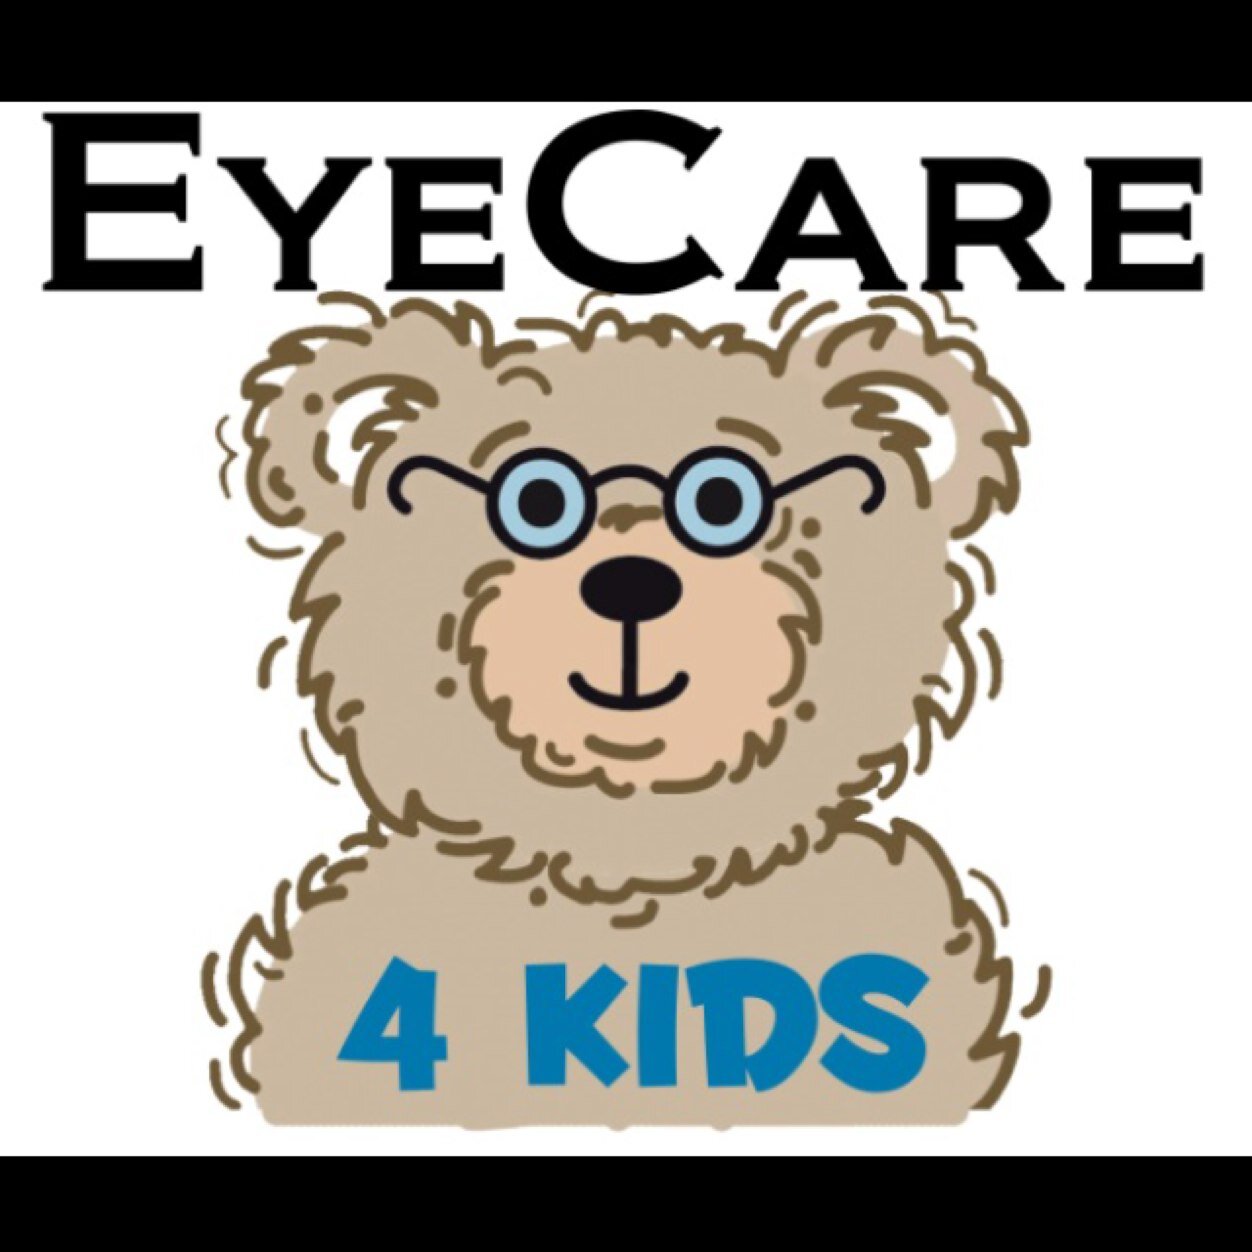 EyeCare4Kids provides professional eyecare to low income, visually impaired children in Nevada at no cost to their family #nonprofit 7027273525